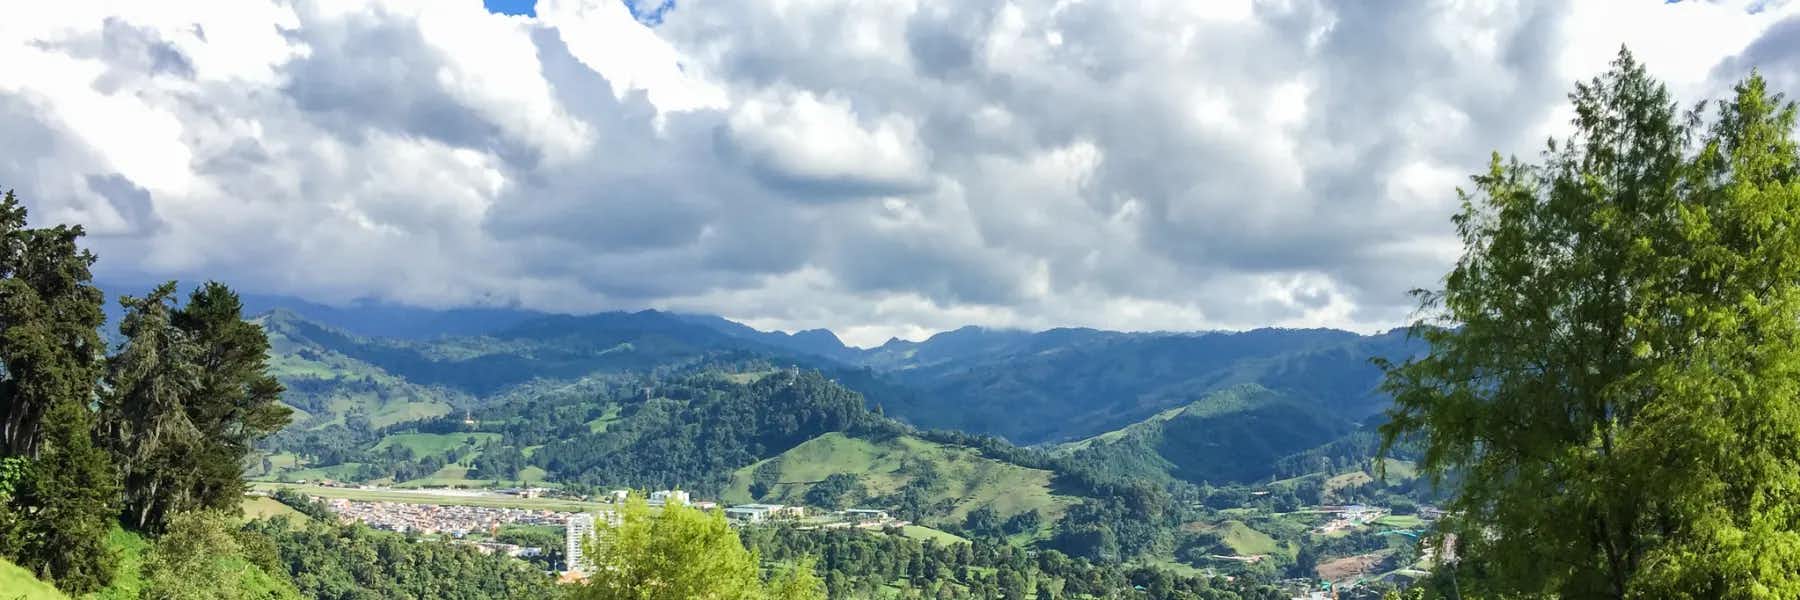 Manizales, Colombia - Things To Do and Expat Safety in This Beautiful City